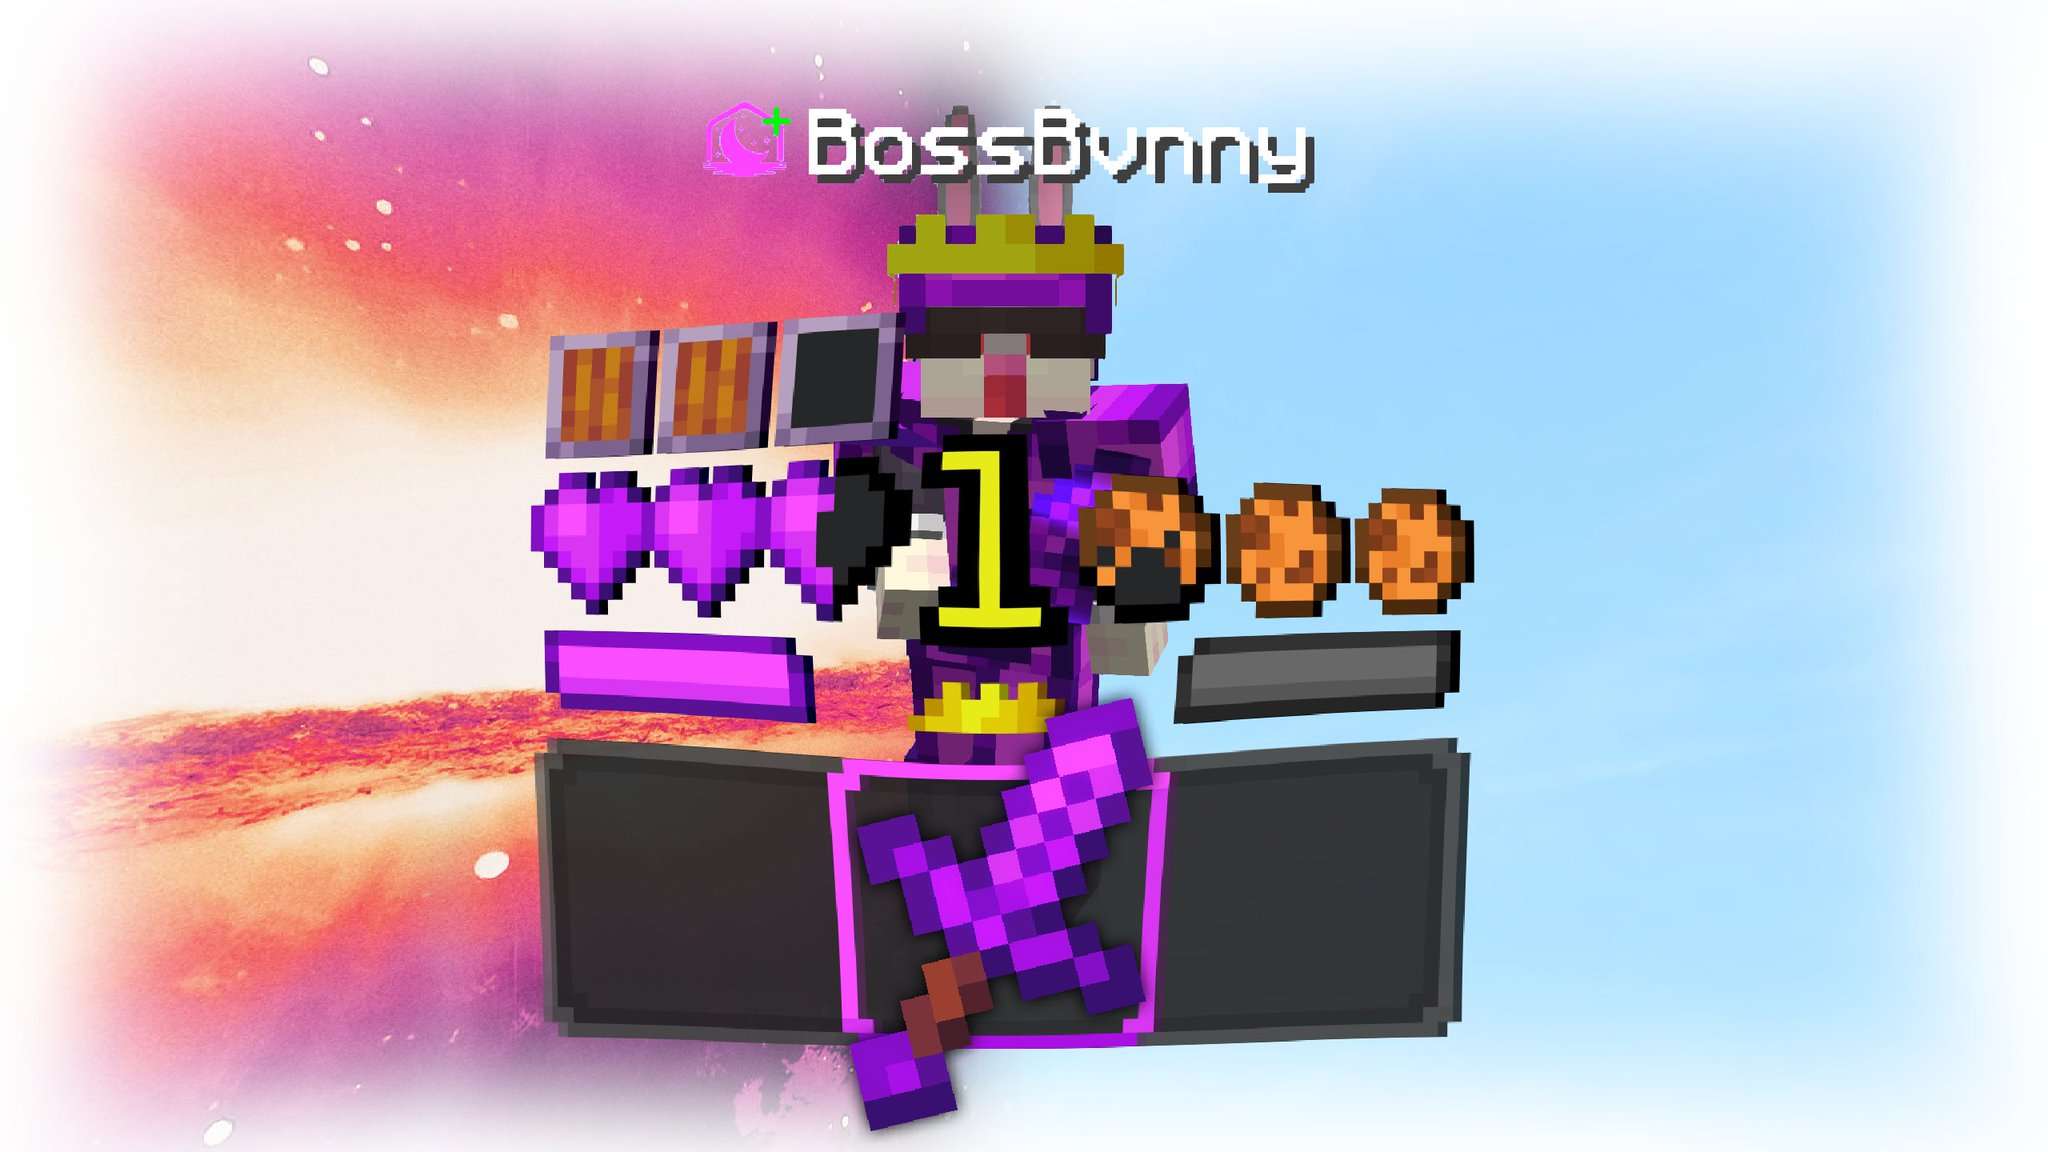 ZAMN 16x | POINTED 16 by Boss Bunny on PvPRP